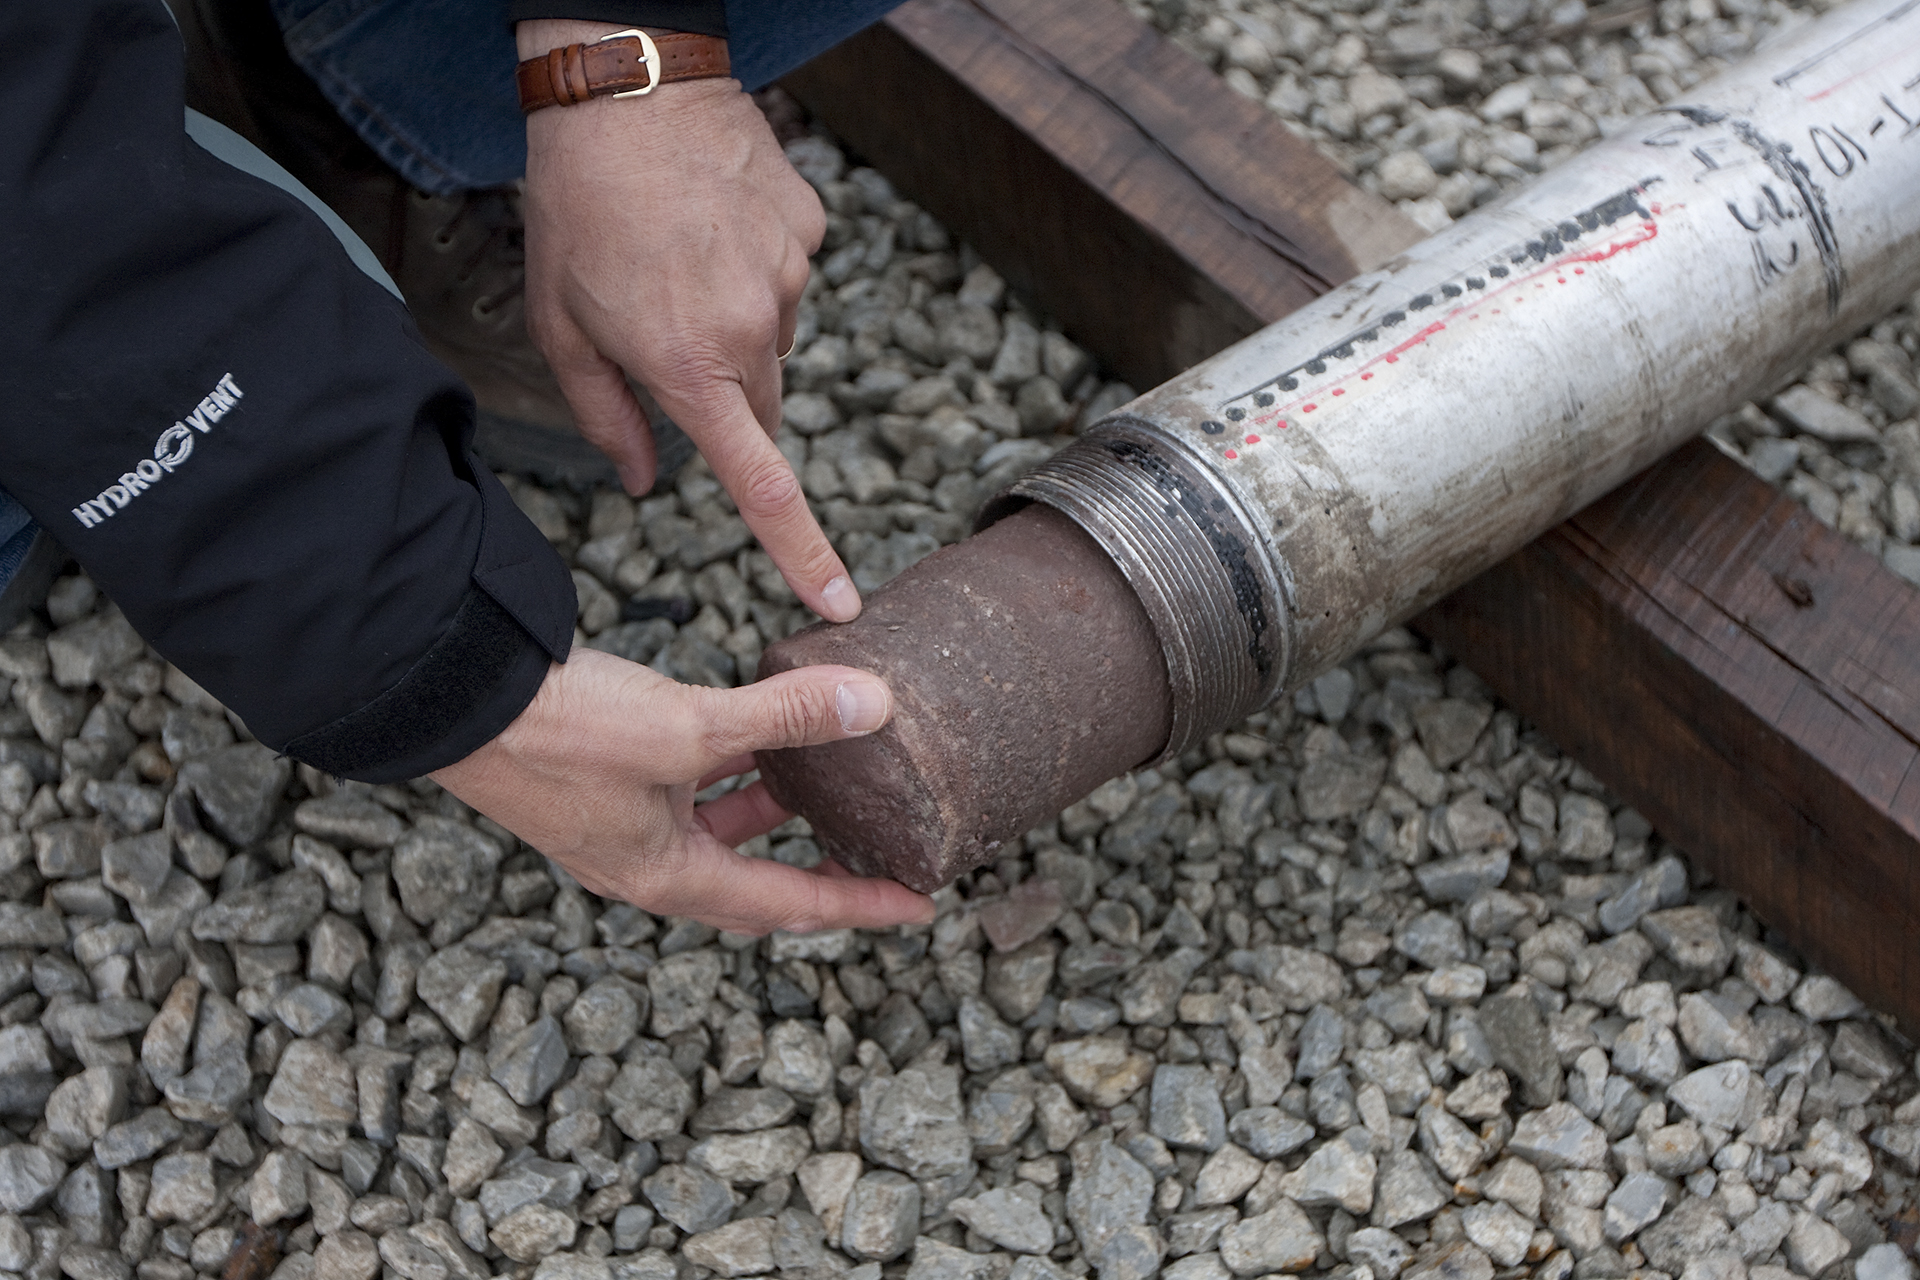 A piece of the Mt. Simon Sandstone core sticks out of the core barrel pulled from the injection well at IBDP.